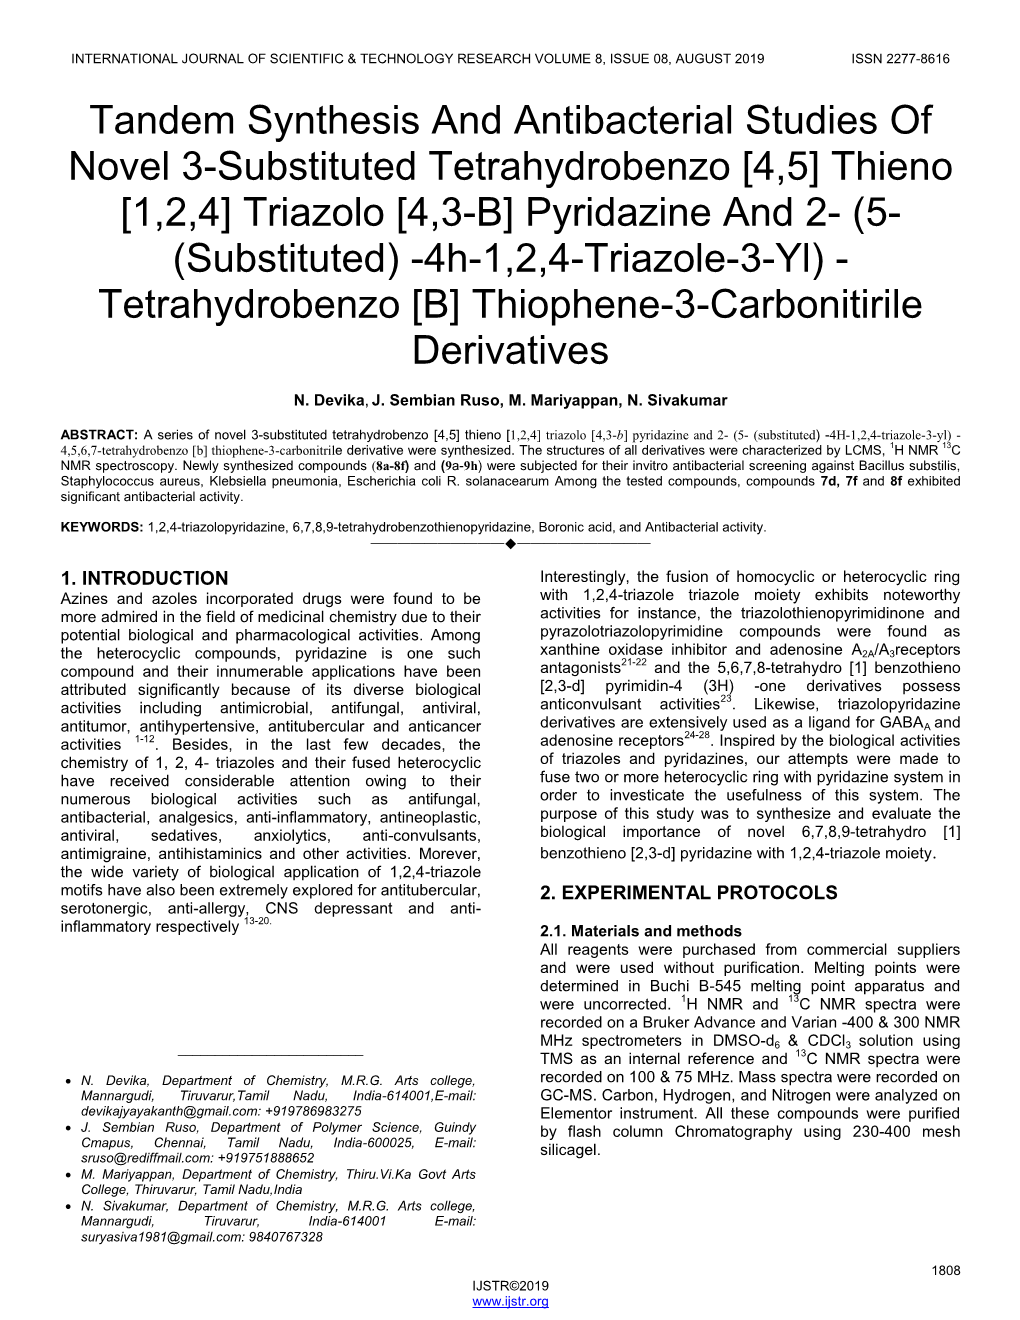 Tandem Synthesis and Antibacterial Studies of Novel 3-Substituted